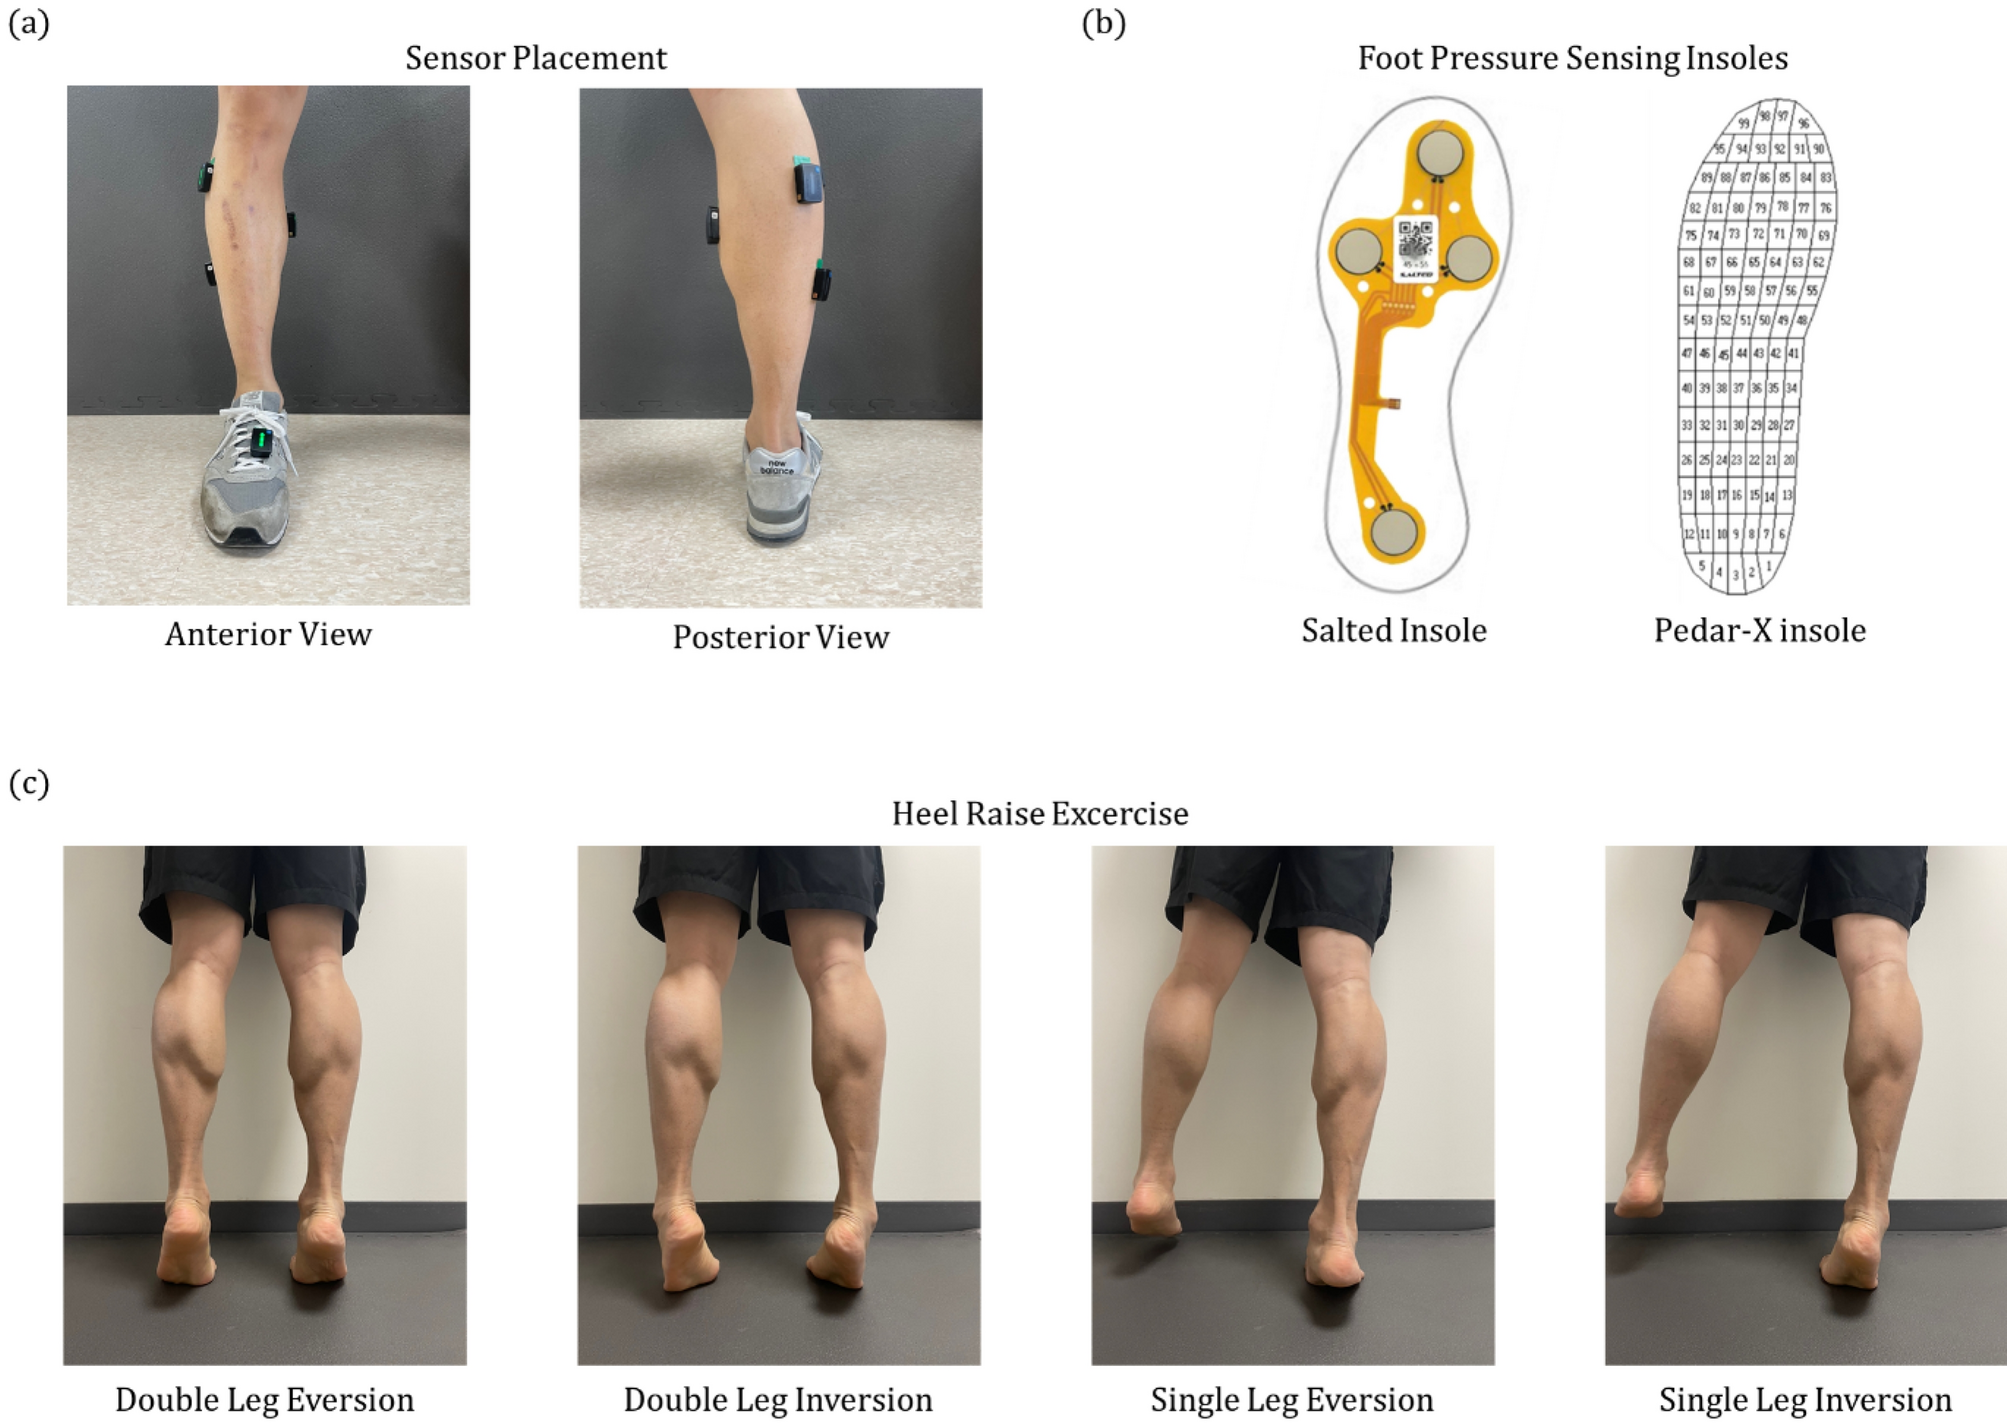 A smart insole system capable of identifying proper heel raise posture for  chronic ankle instability rehabilitation